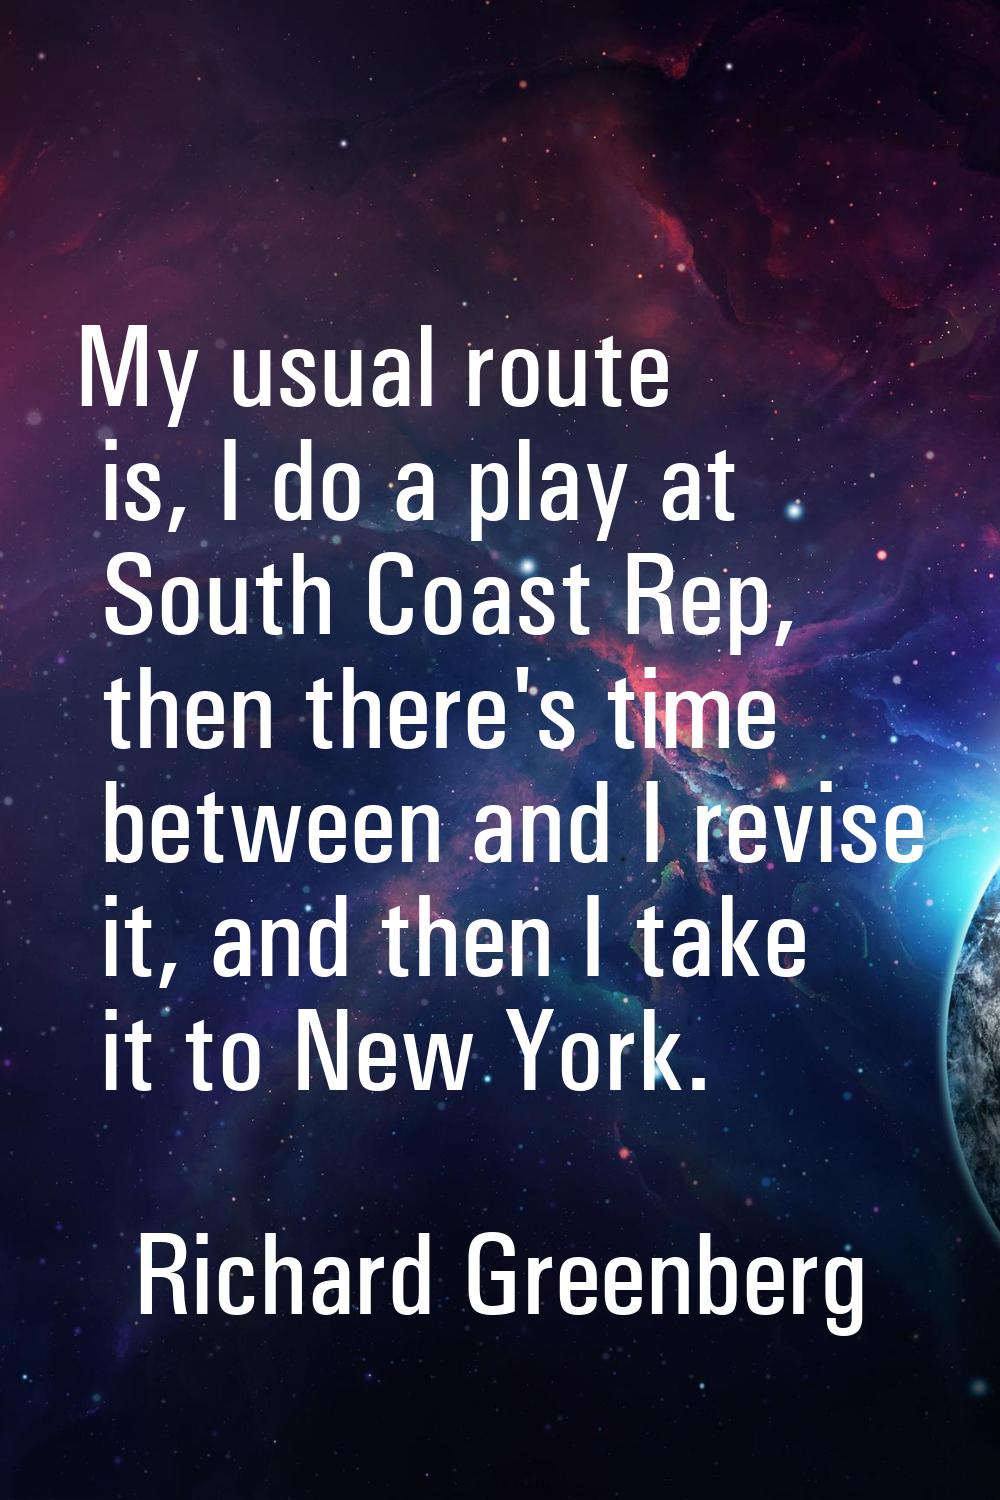 My usual route is, I do a play at South Coast Rep, then there's time between and I revise it, and t